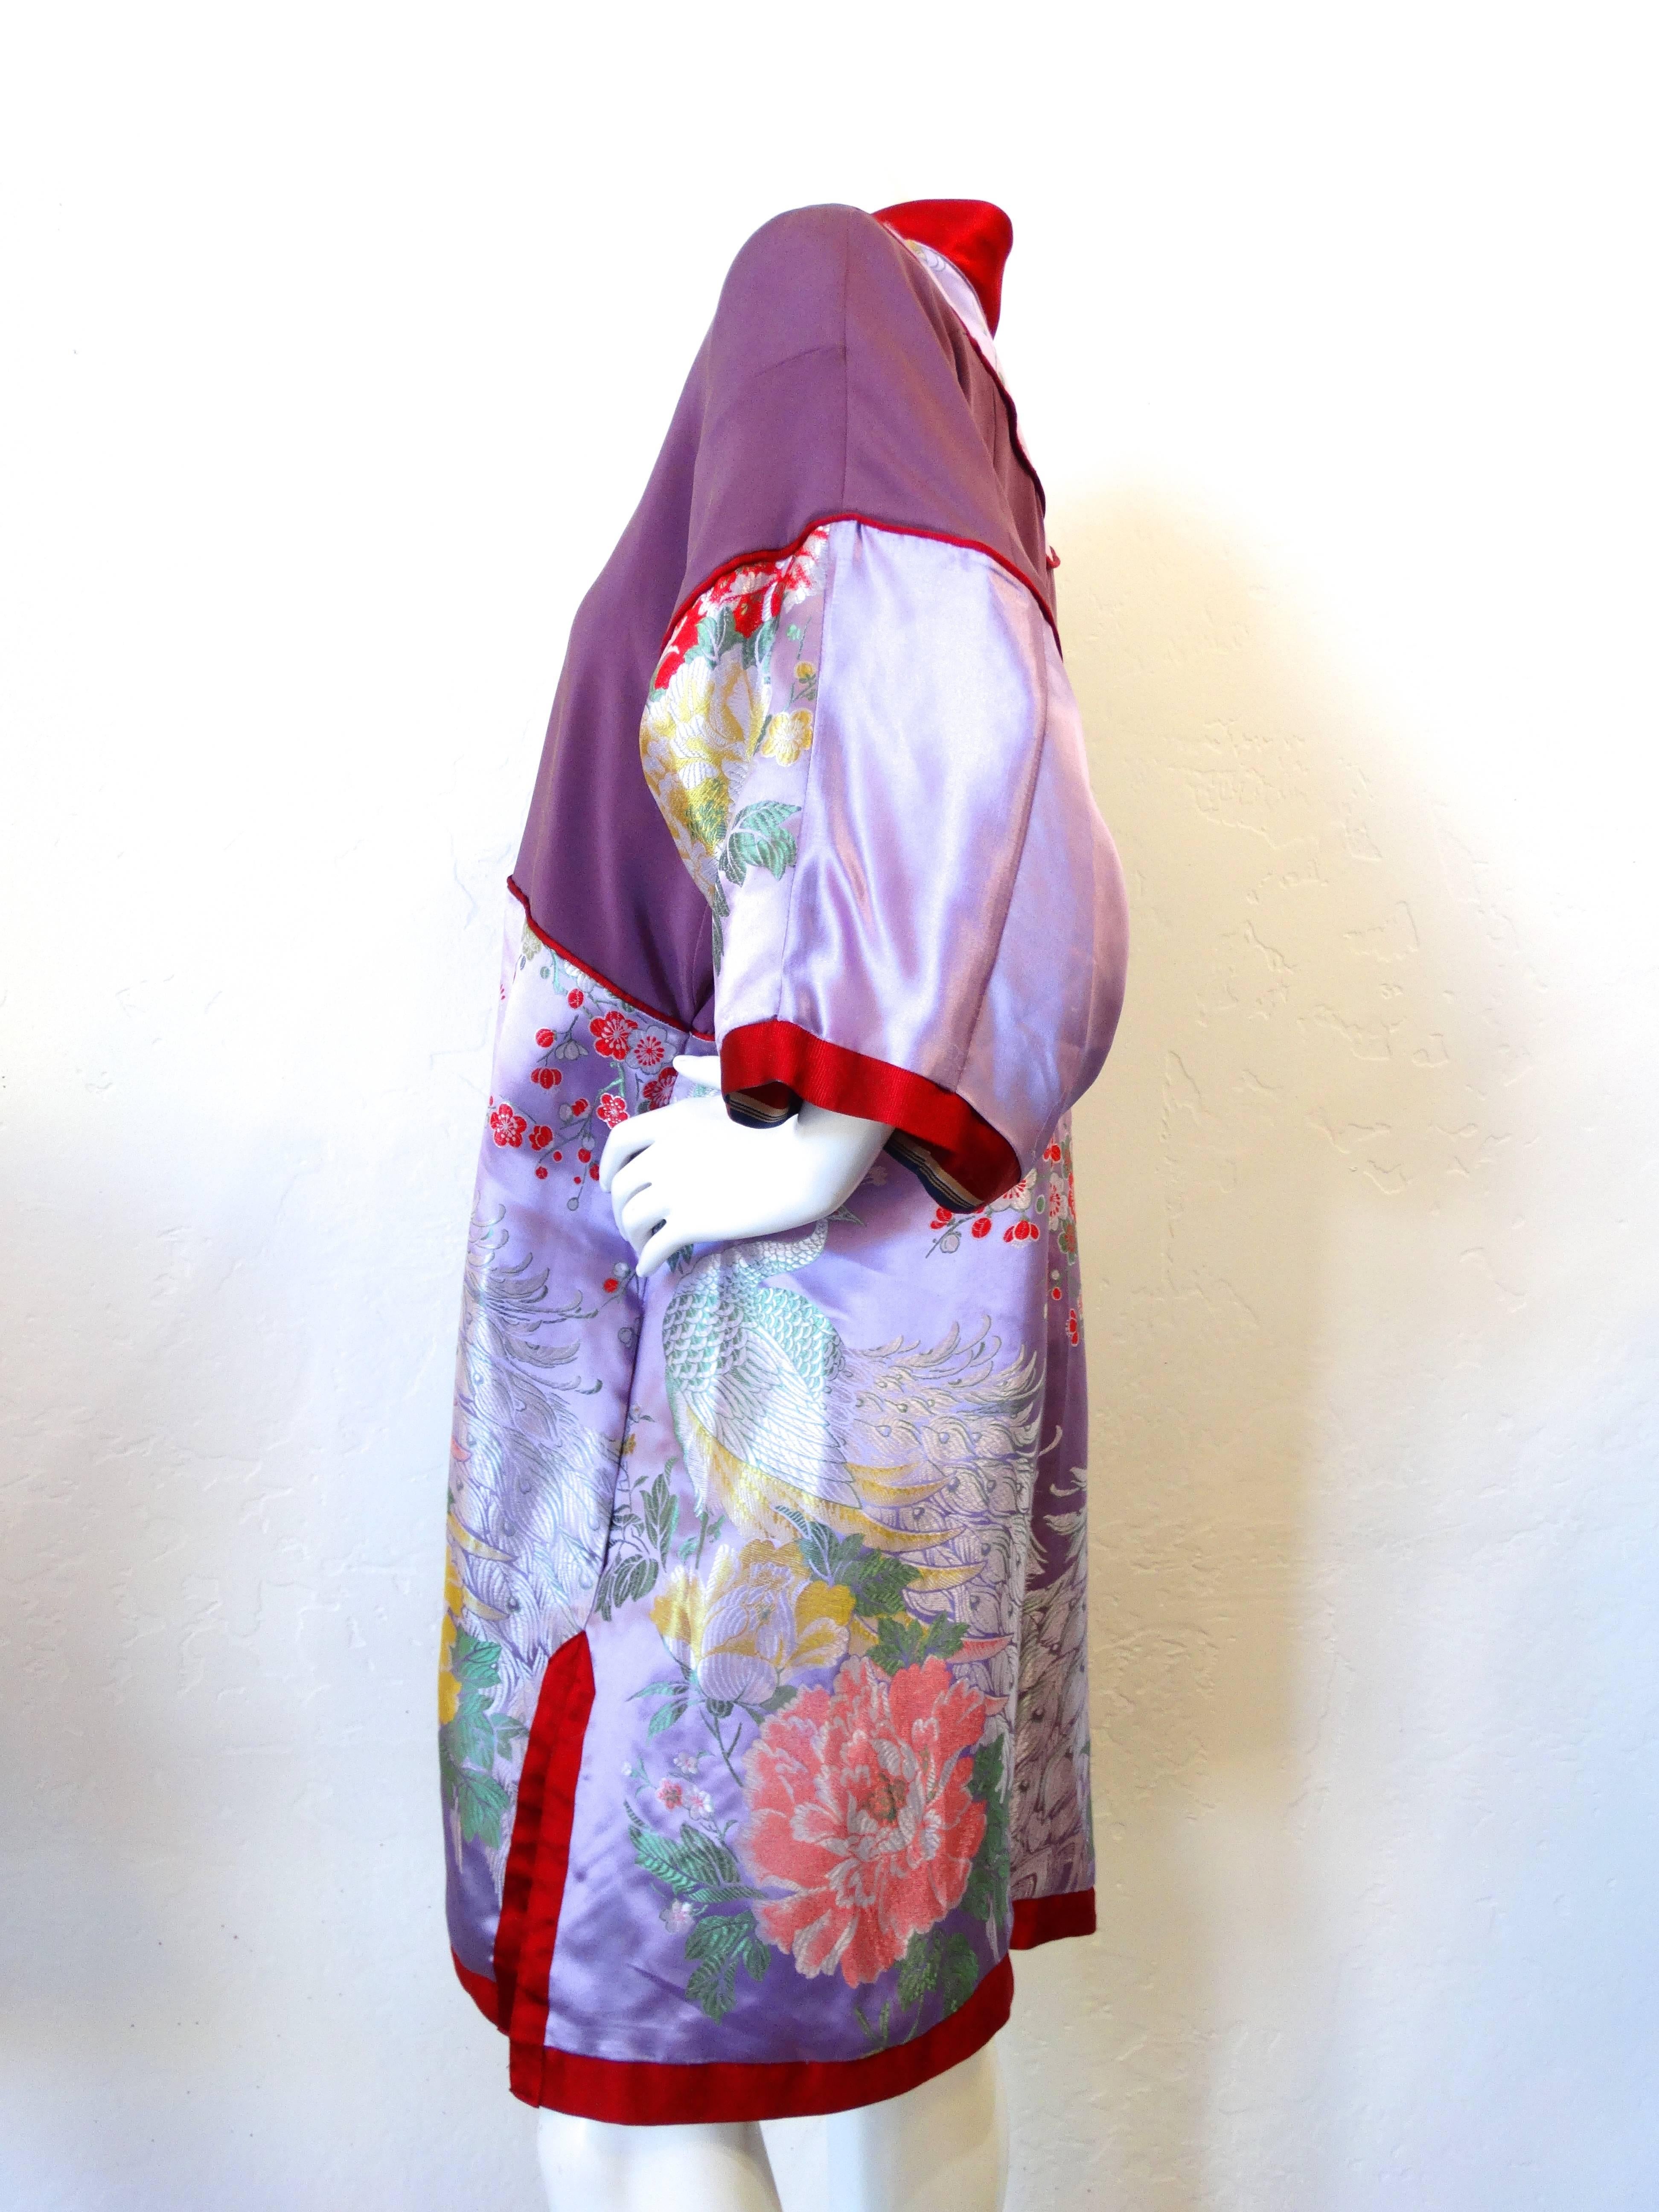 This piece is one of a kind, handmade in the 1960s. Pieced together from several different silks- this piece is set to stun! Lilac embroidered Japanese silk with botanical and peacock motifs. Baby pink kimono closures up the bust line. English